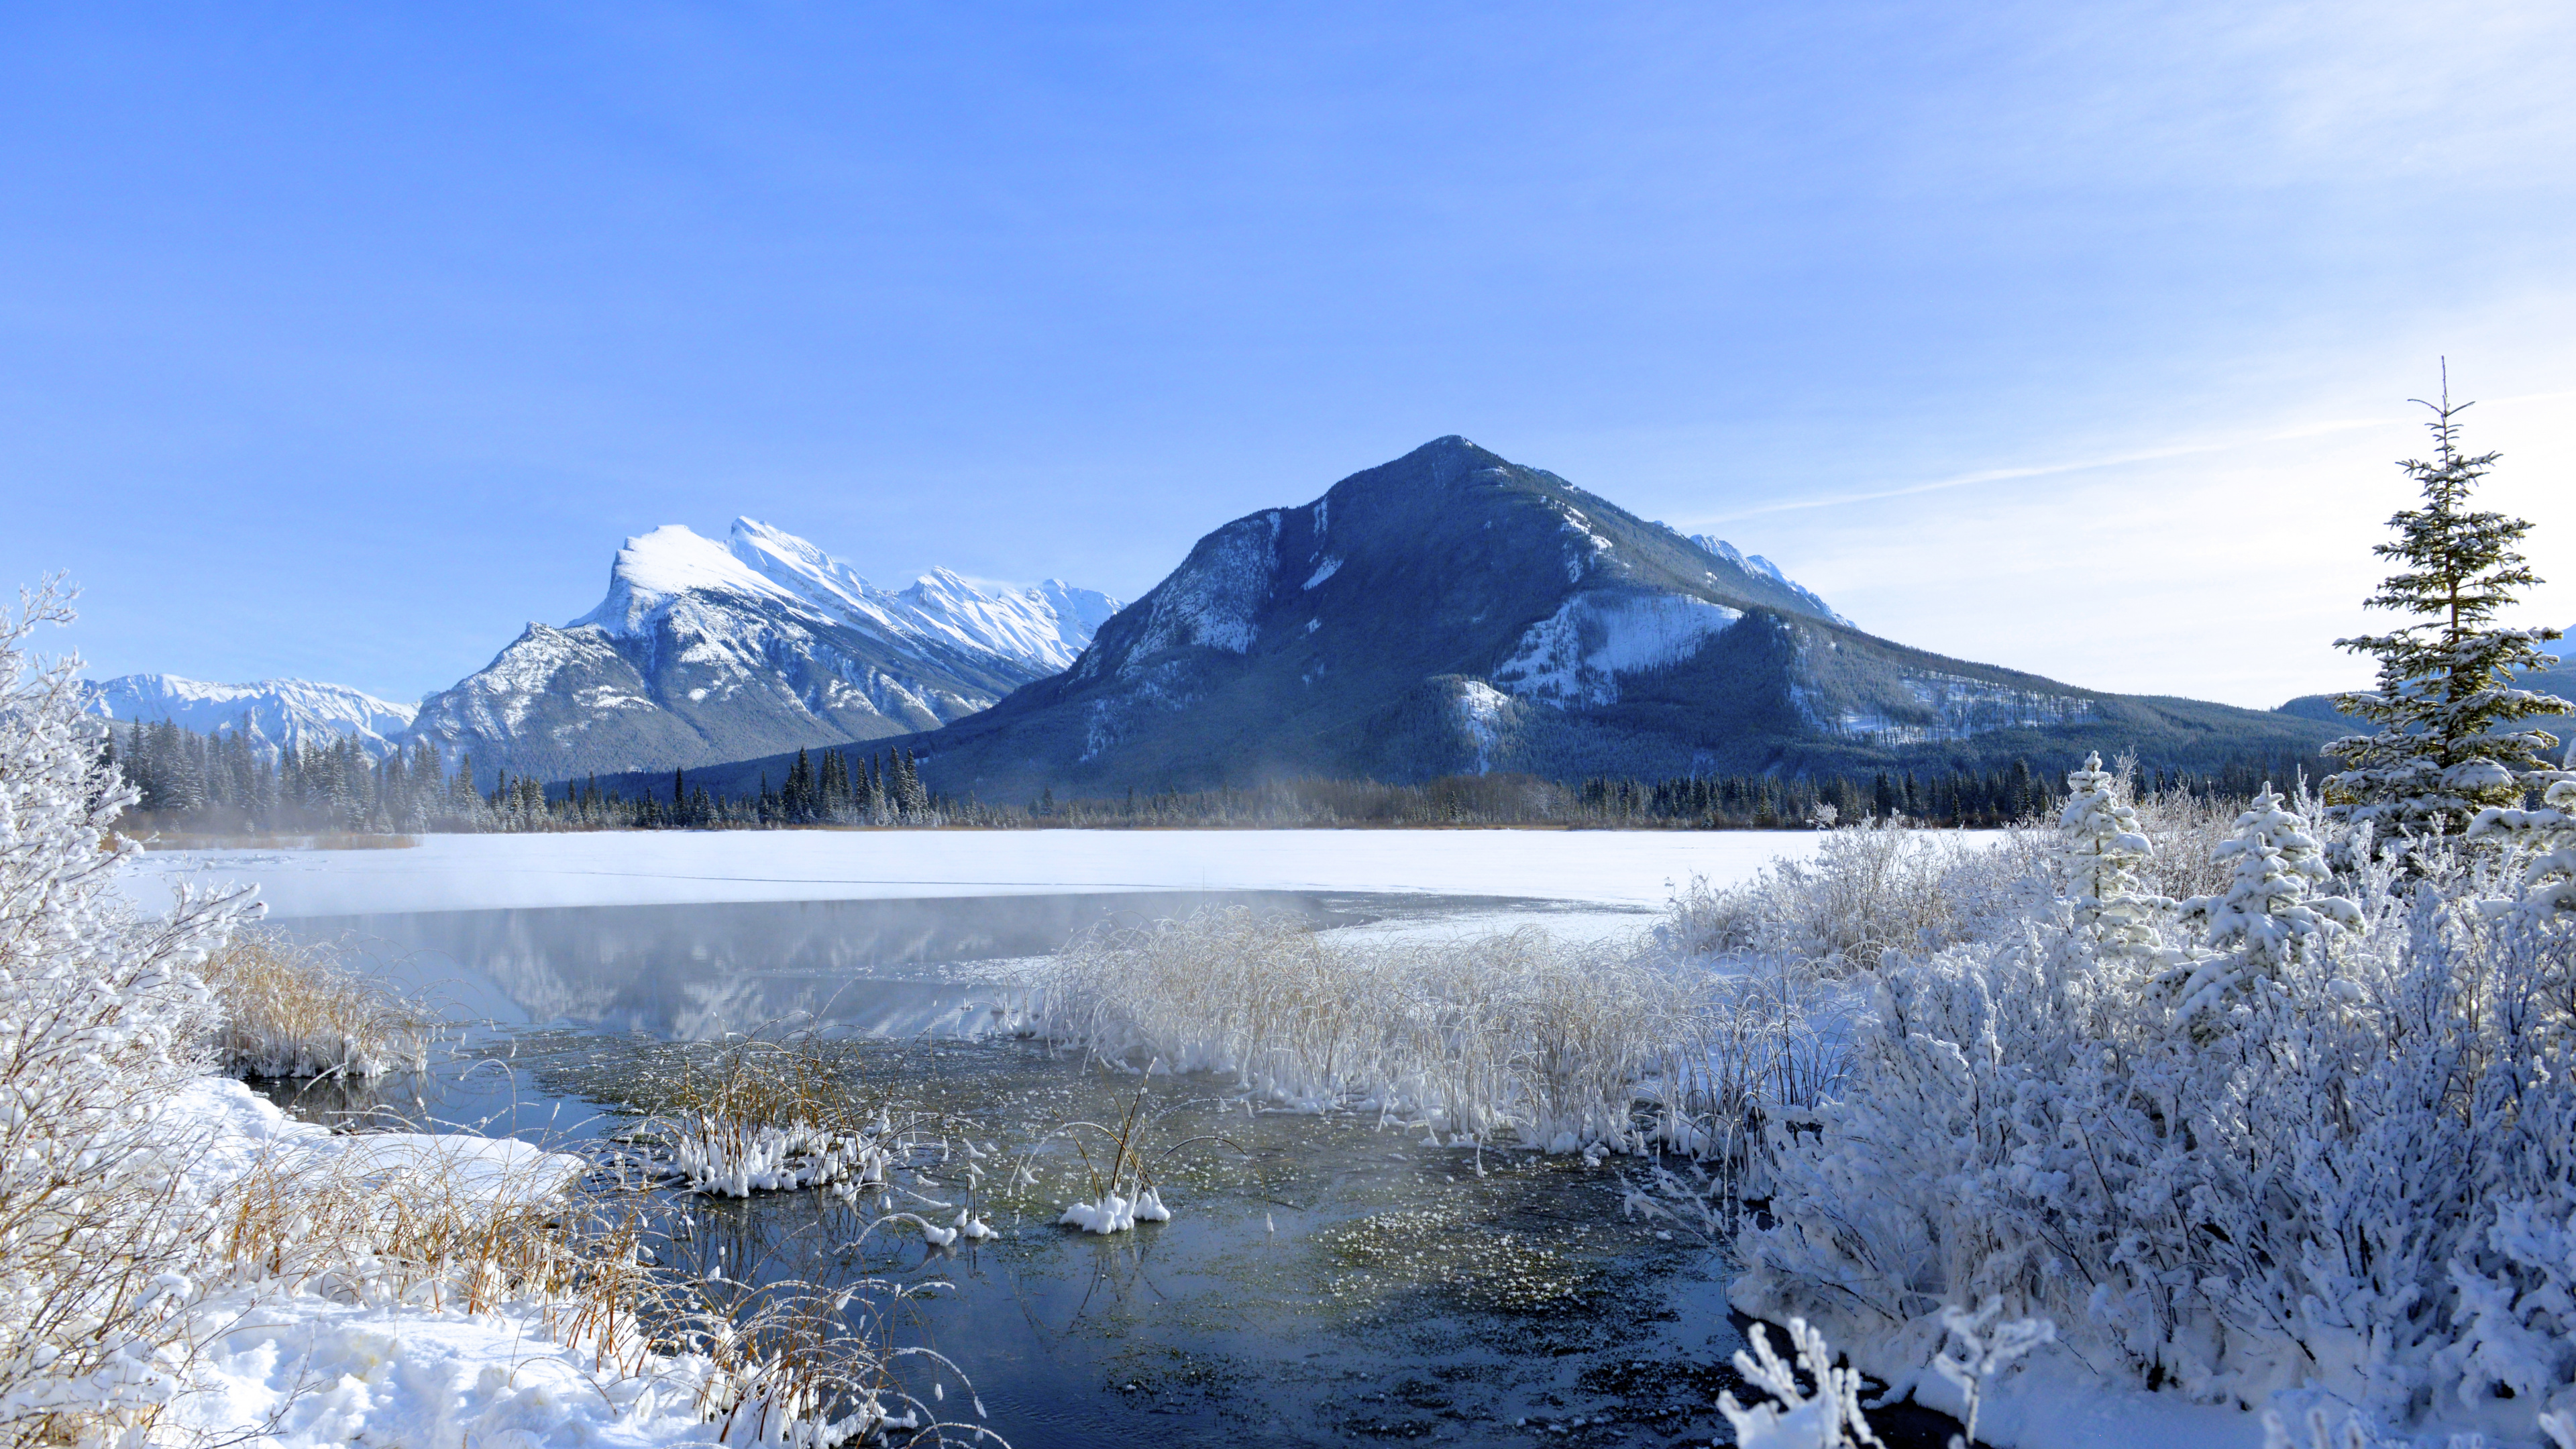 Snow Covered Mountain Near Lake Under Blue Sky During Daytime. Wallpaper in 3840x2160 Resolution